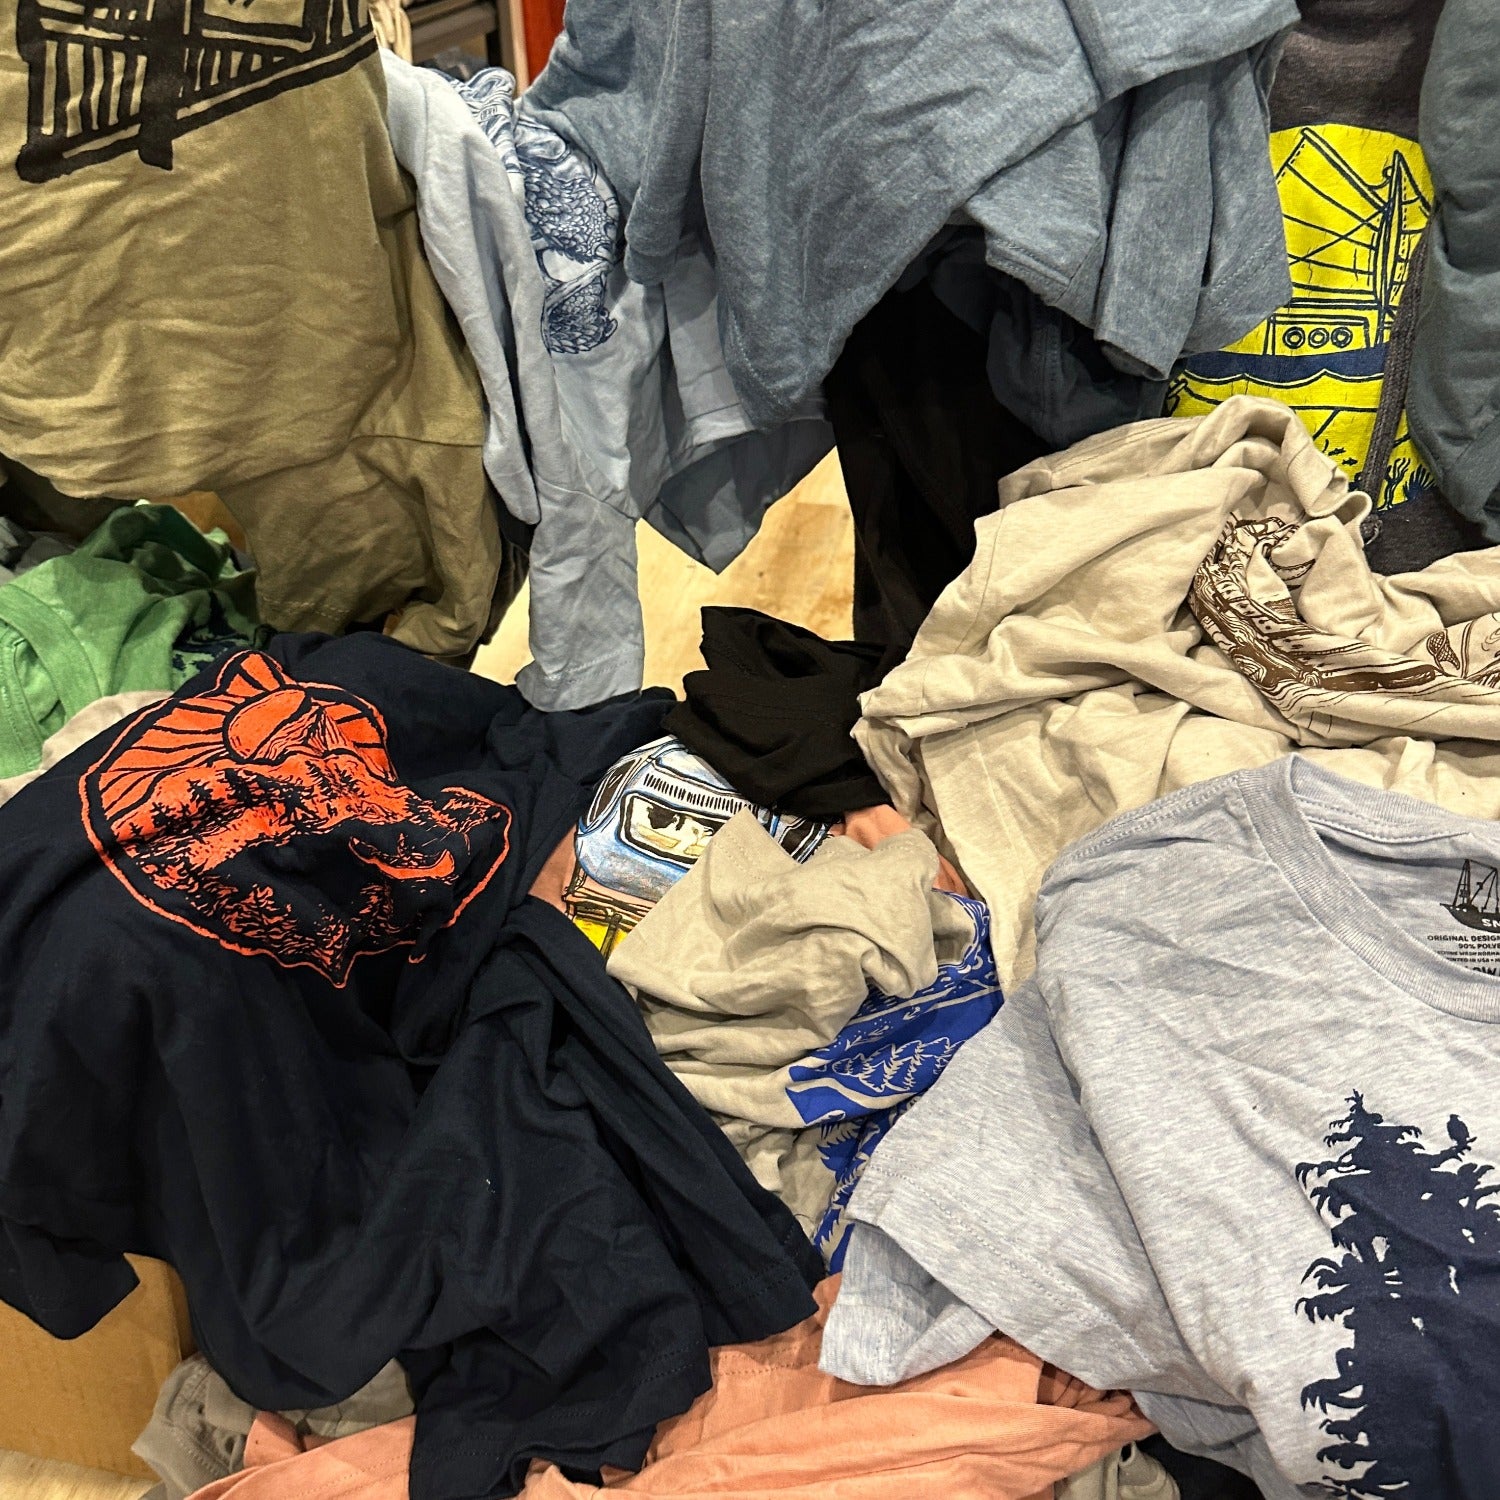 pile of different colored t-shirts with different designs and colors of inks.